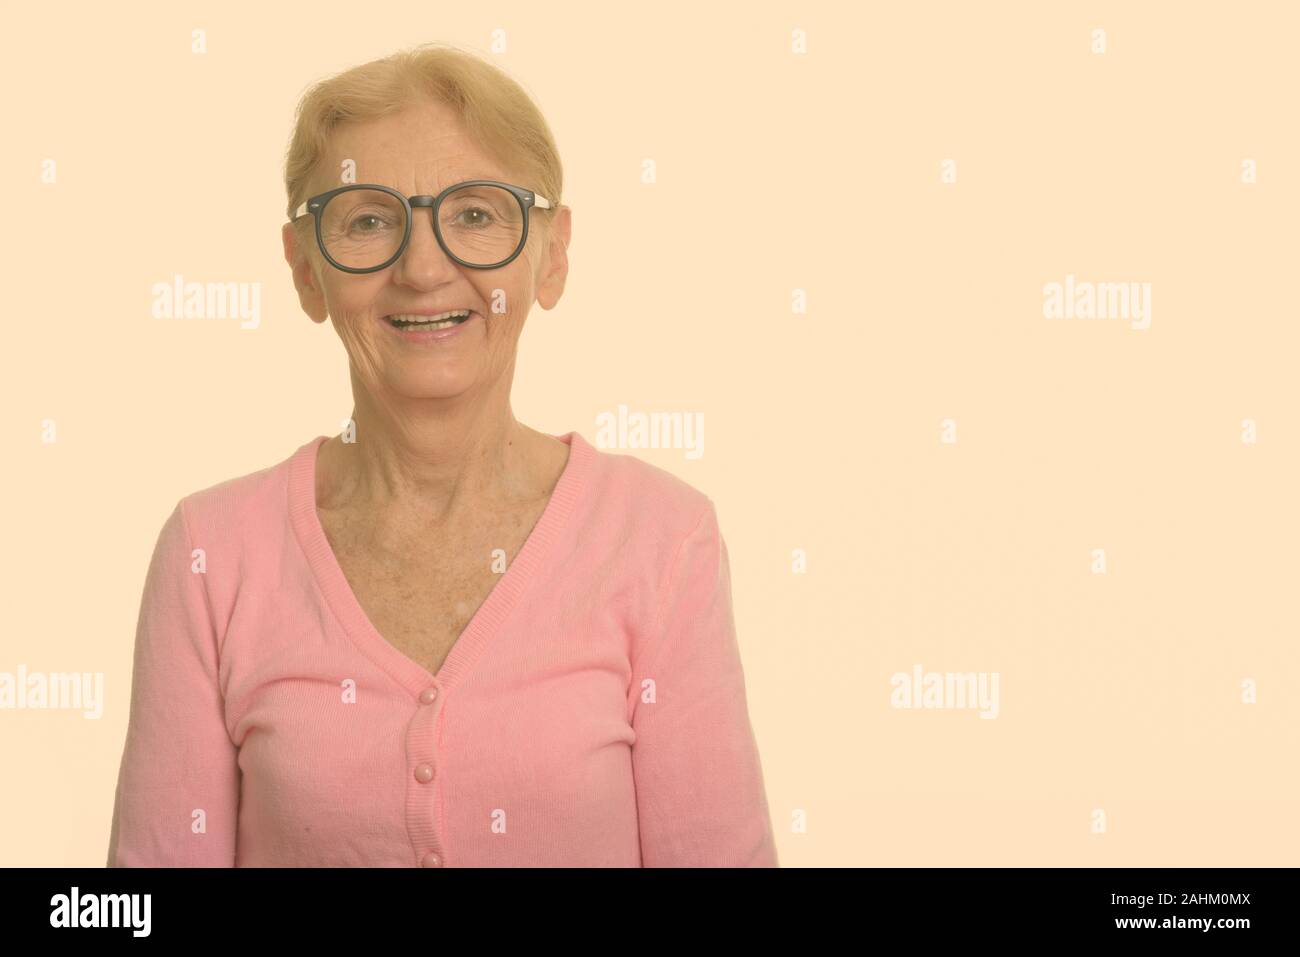 Happy senior nerd woman smiling and laughing while wearing geeky eyeglasses Stock Photo